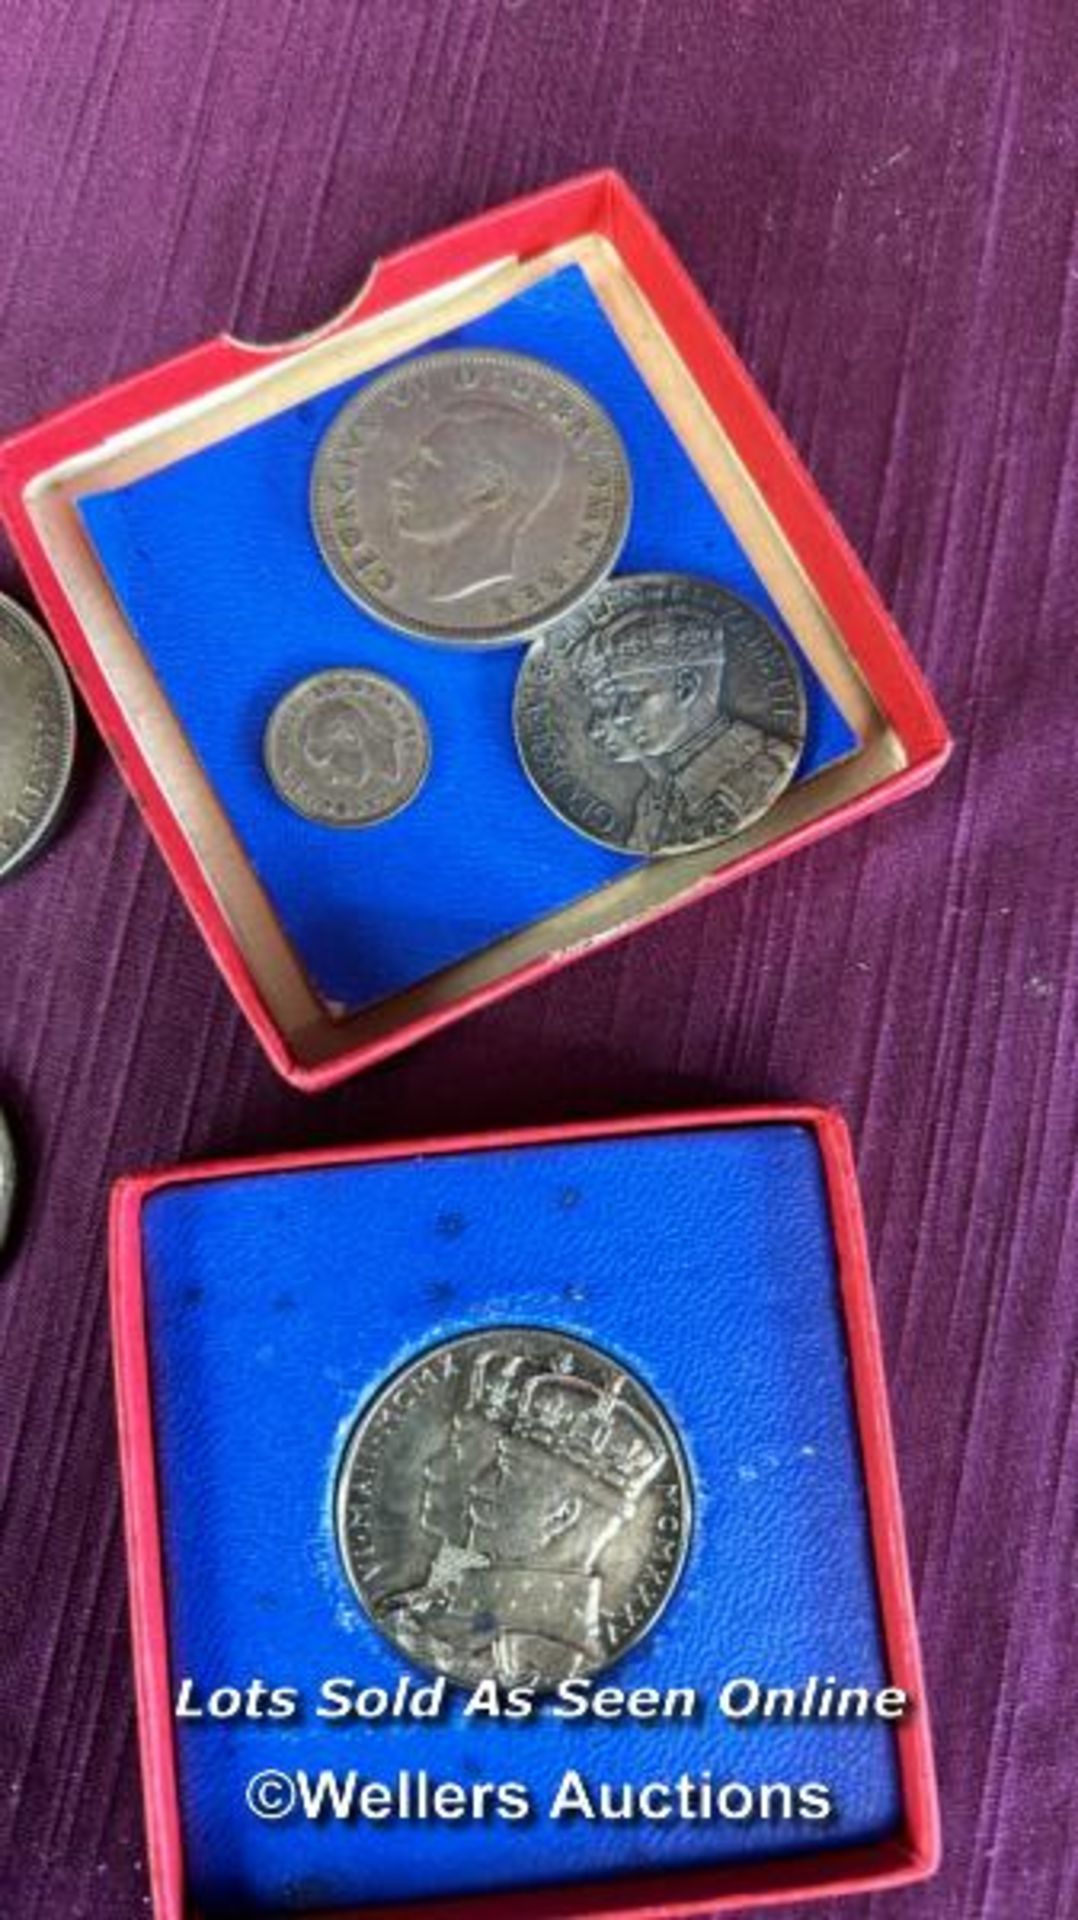 COLLECTION OF MAINLY QUEEN VICTORIA COINS INCLUDING A 1837-1897 COMMEMORATIVE BRONZE COIN - Image 4 of 4